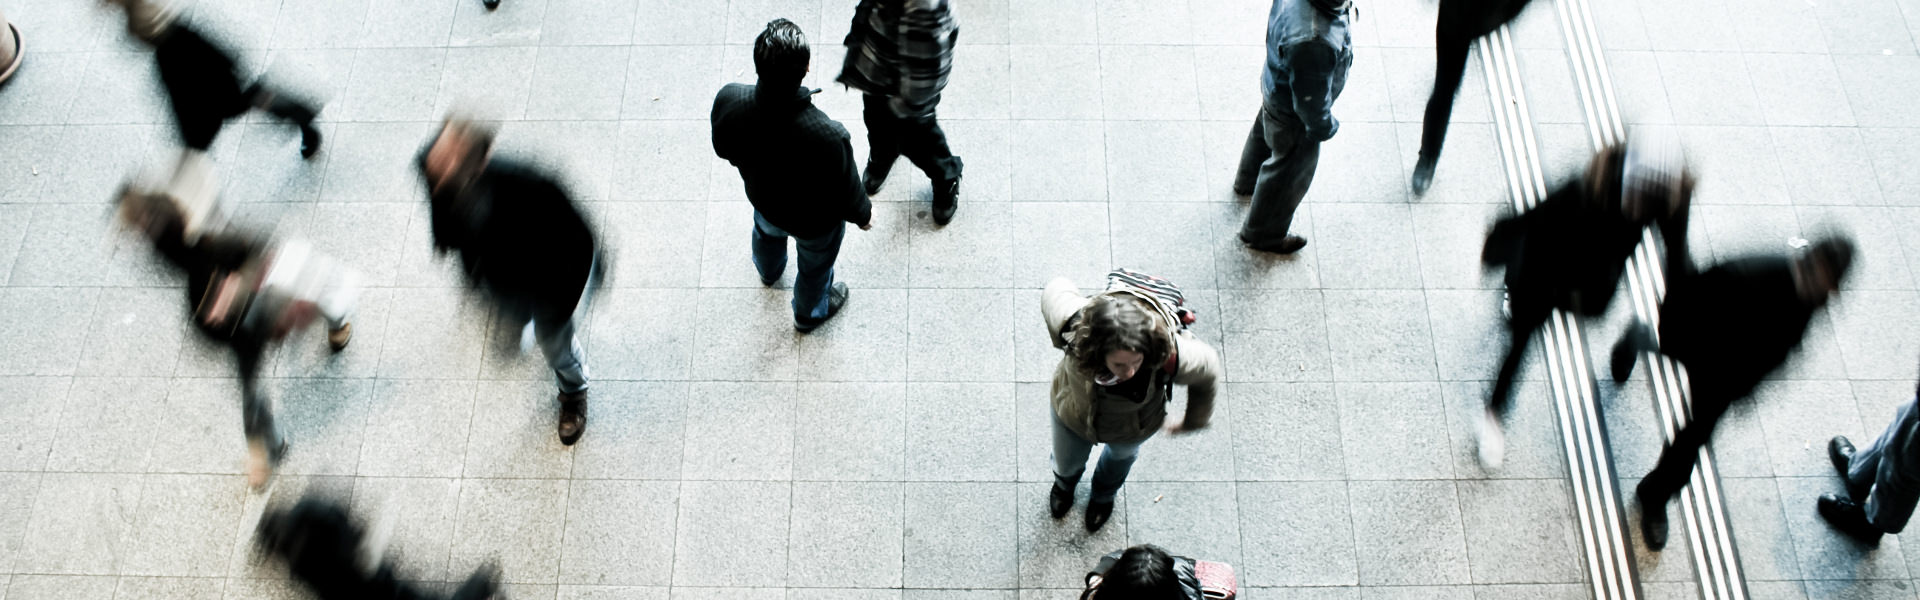 Overhead view of people walking and talking in a public space